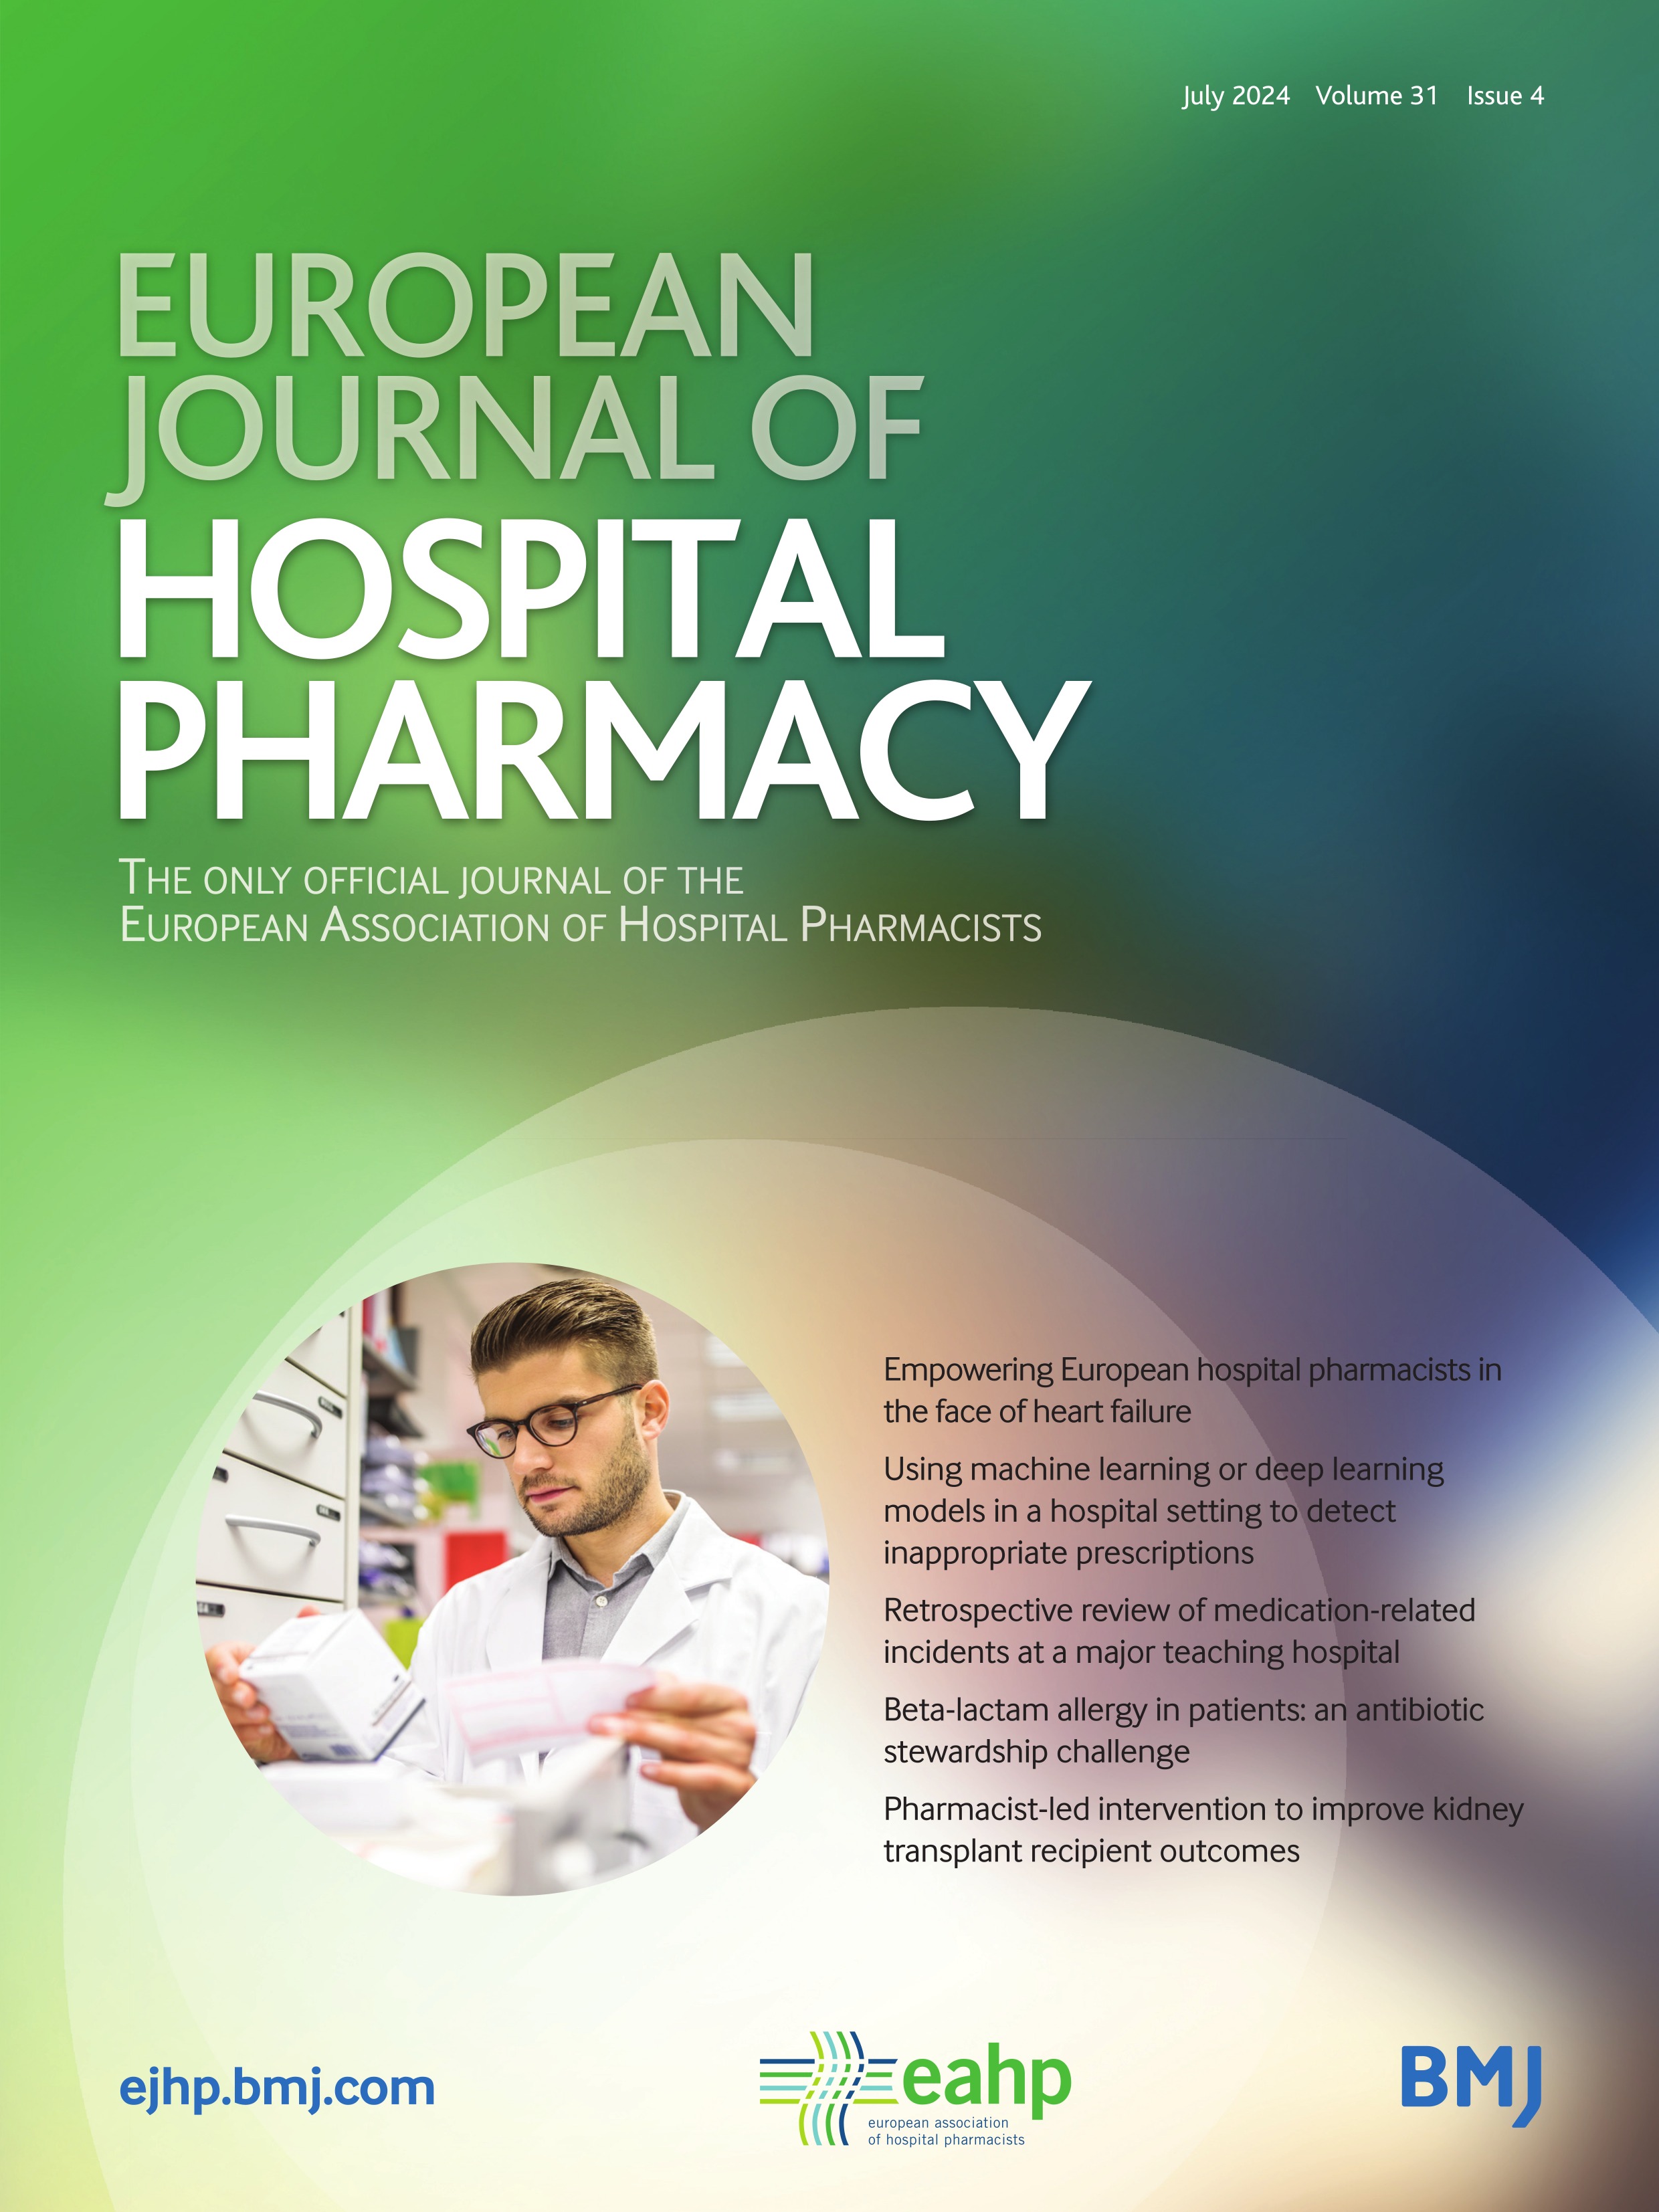 Retrospective review of medication-related incidents at a major teaching hospital and the potential mitigation of these incidents with electronic prescribing and medicines administration